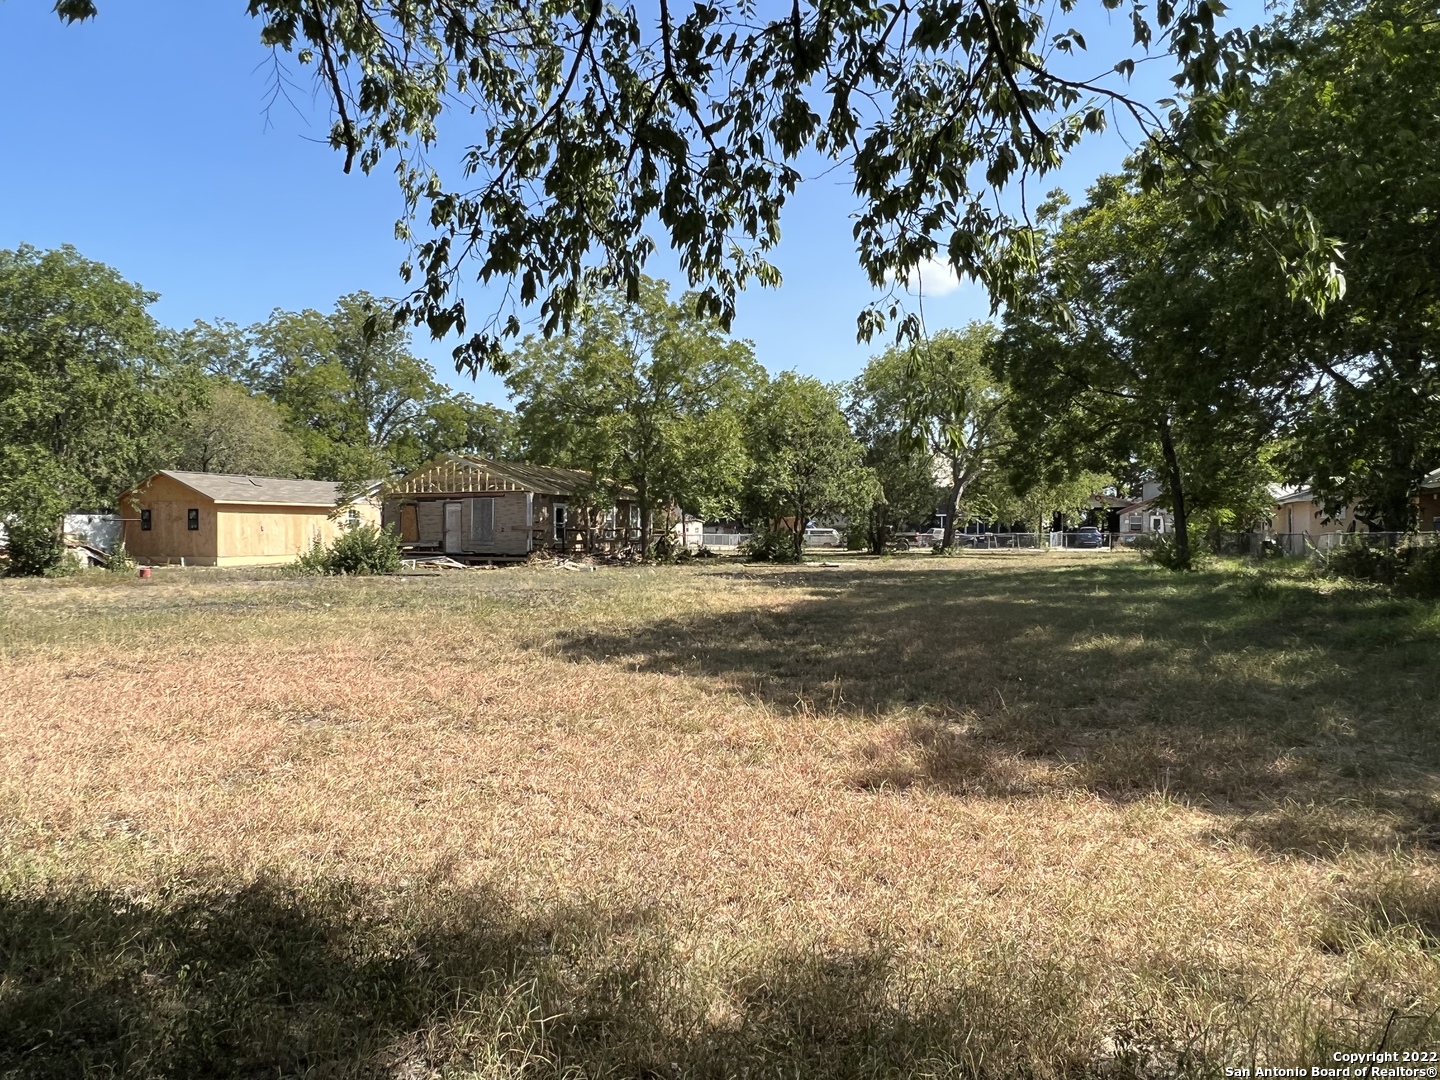 2 casitas on a little over an acre inside the city limits. These 2 homes are less than a minute from SAFD Station 25 Grid and Price Elementary, under 10 mins to the new Kelly's Tech Port Center + Arena, Downtown, Lackland AFB as well as plenty of shopping and dining nearby off of SW Military Drive. All 3 lots together each .345 in size TOTAL 1.035 acres, utilities ON site are electricity, sewage and plumbing, both dwellings already leveled, 139 has a new roof, interior framed for a 2 BD 1 bath, laundry room and side entrance, pex plumbed for washer, bathroom and kitchen as well as wired for electricity (all permits available), new windows (additional added), owner has also added insulation.  2nd dwelling 141 is an older home and owner just completed the leveling and is now working on the roof. Taxes are for 2021 for all 3 lots combined. Seller will also entertain selling lot 143 Price Ave separate.  Please keep in mind price will increase as owner continues to improve the dwellings. Thank you for your interest.